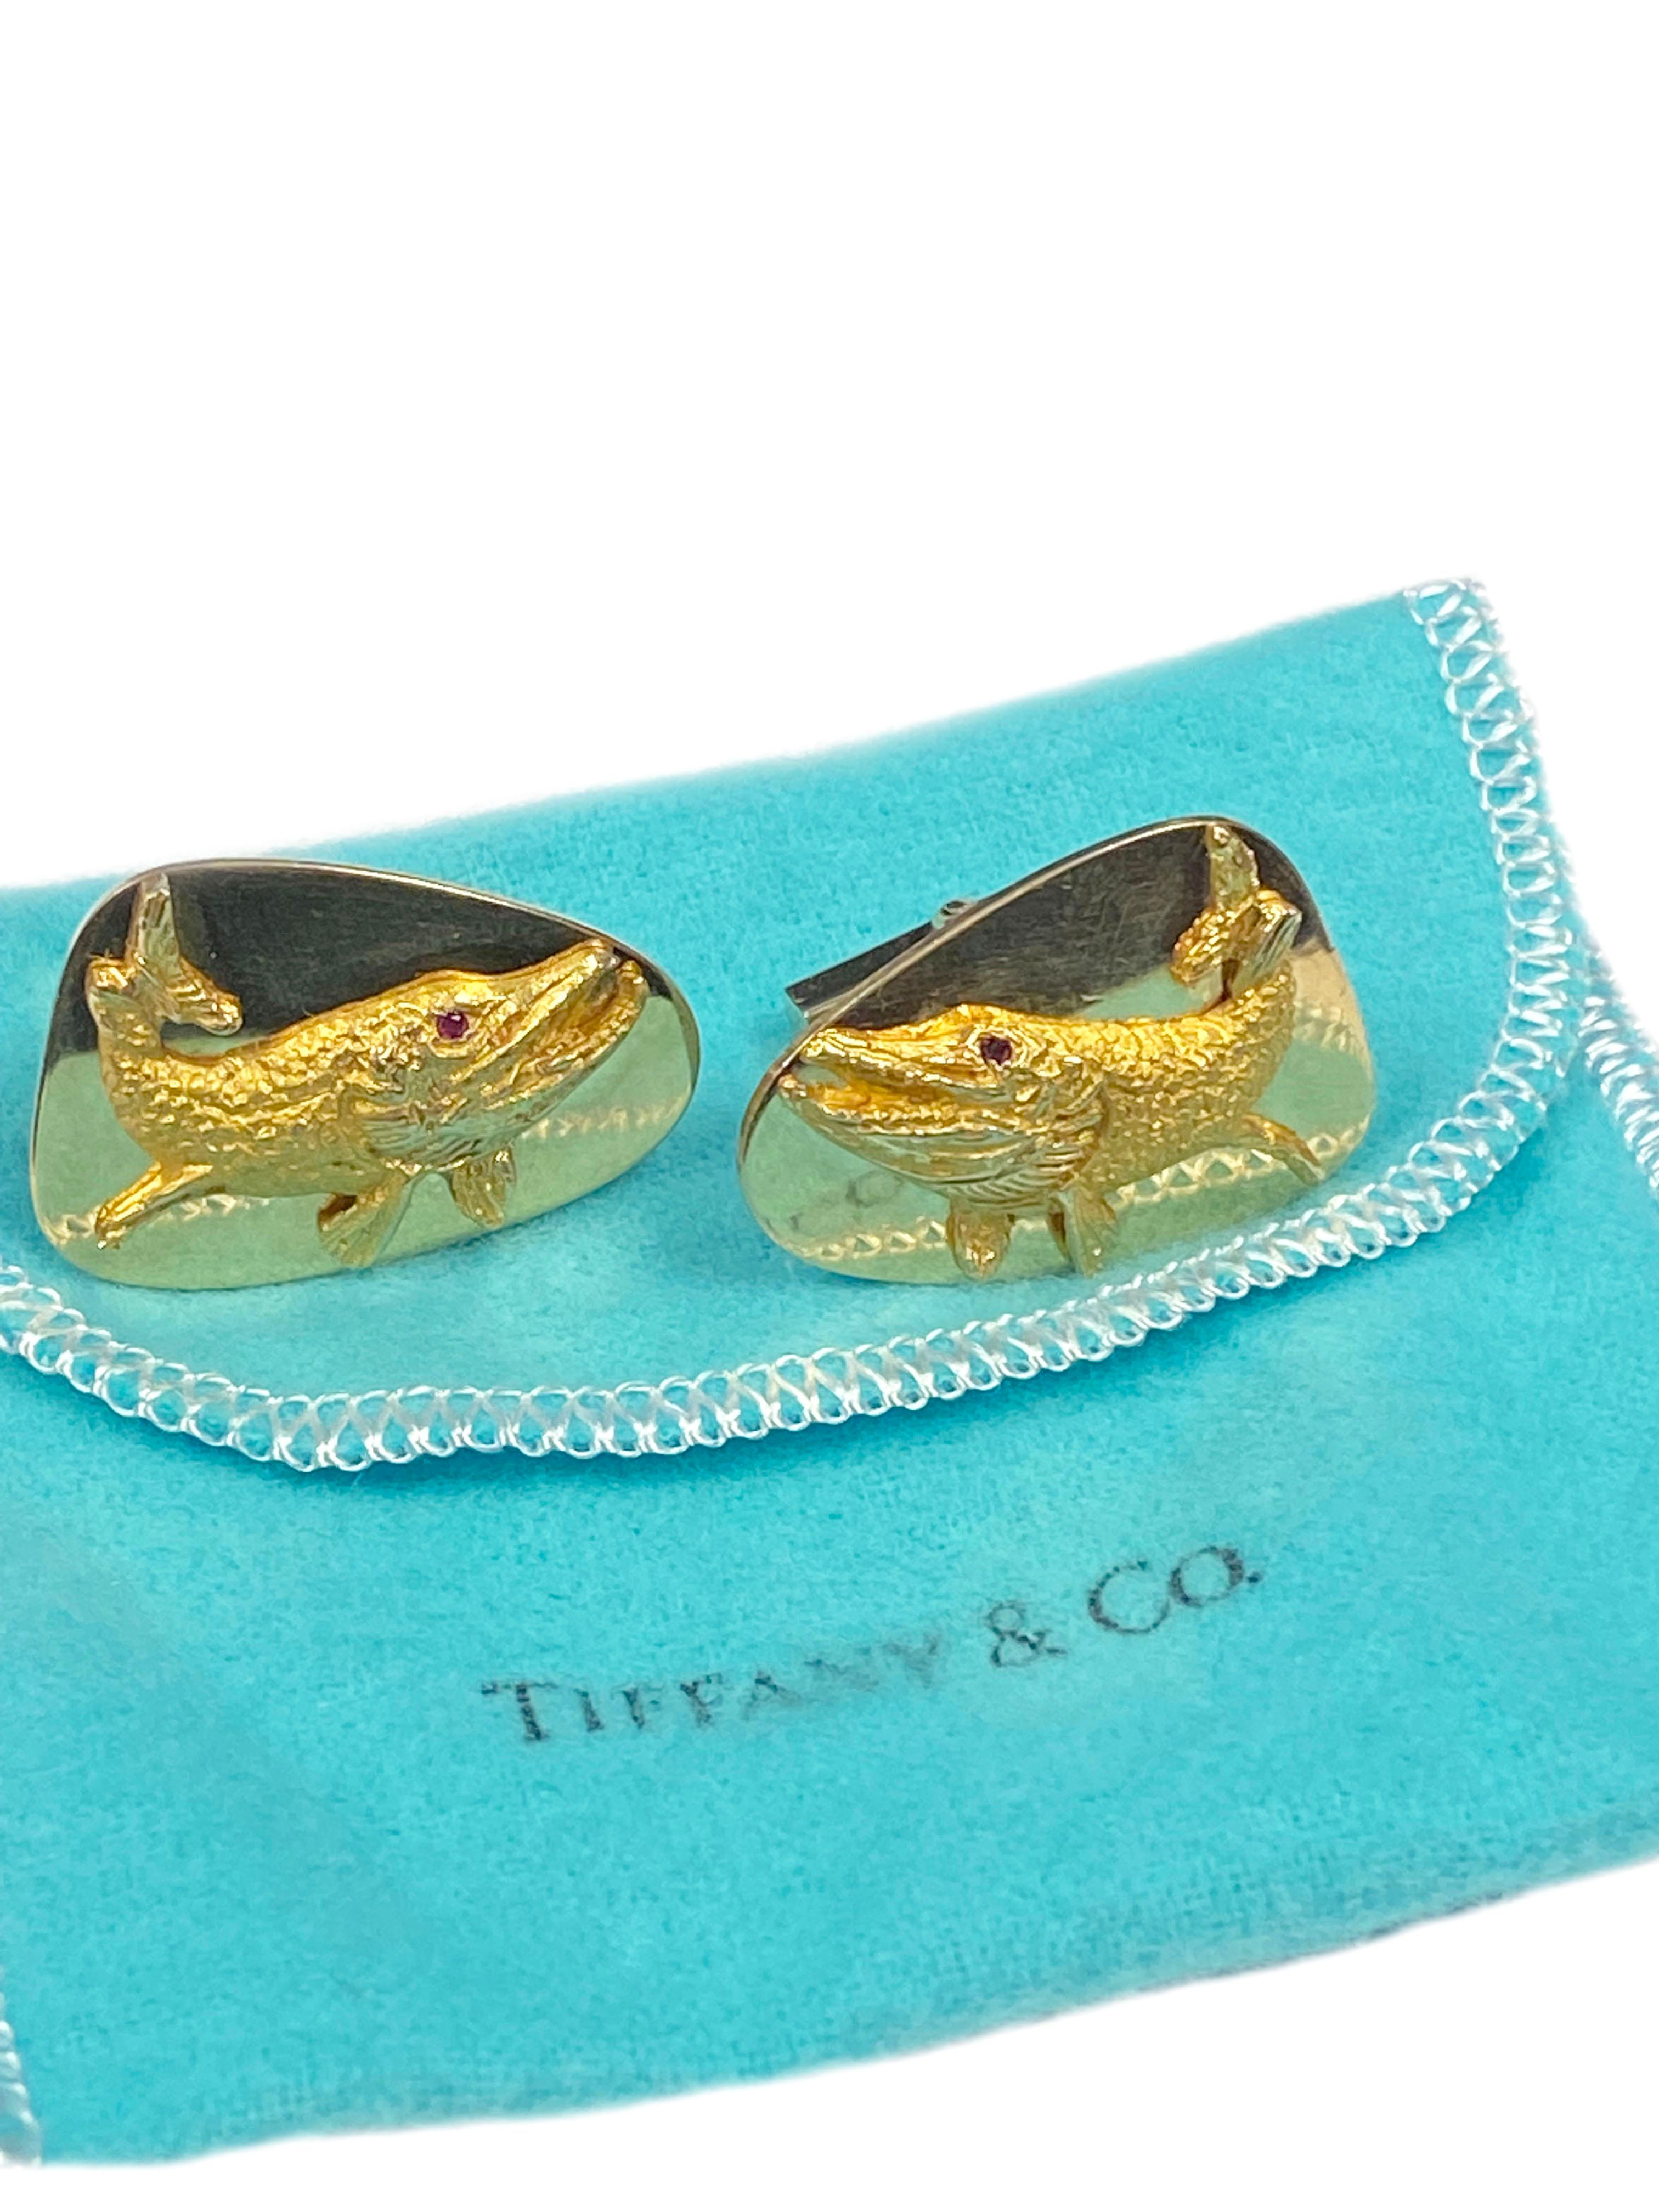 Tiffany & Company Large Yellow Gold Fish Cuff Links In Excellent Condition For Sale In Chicago, IL